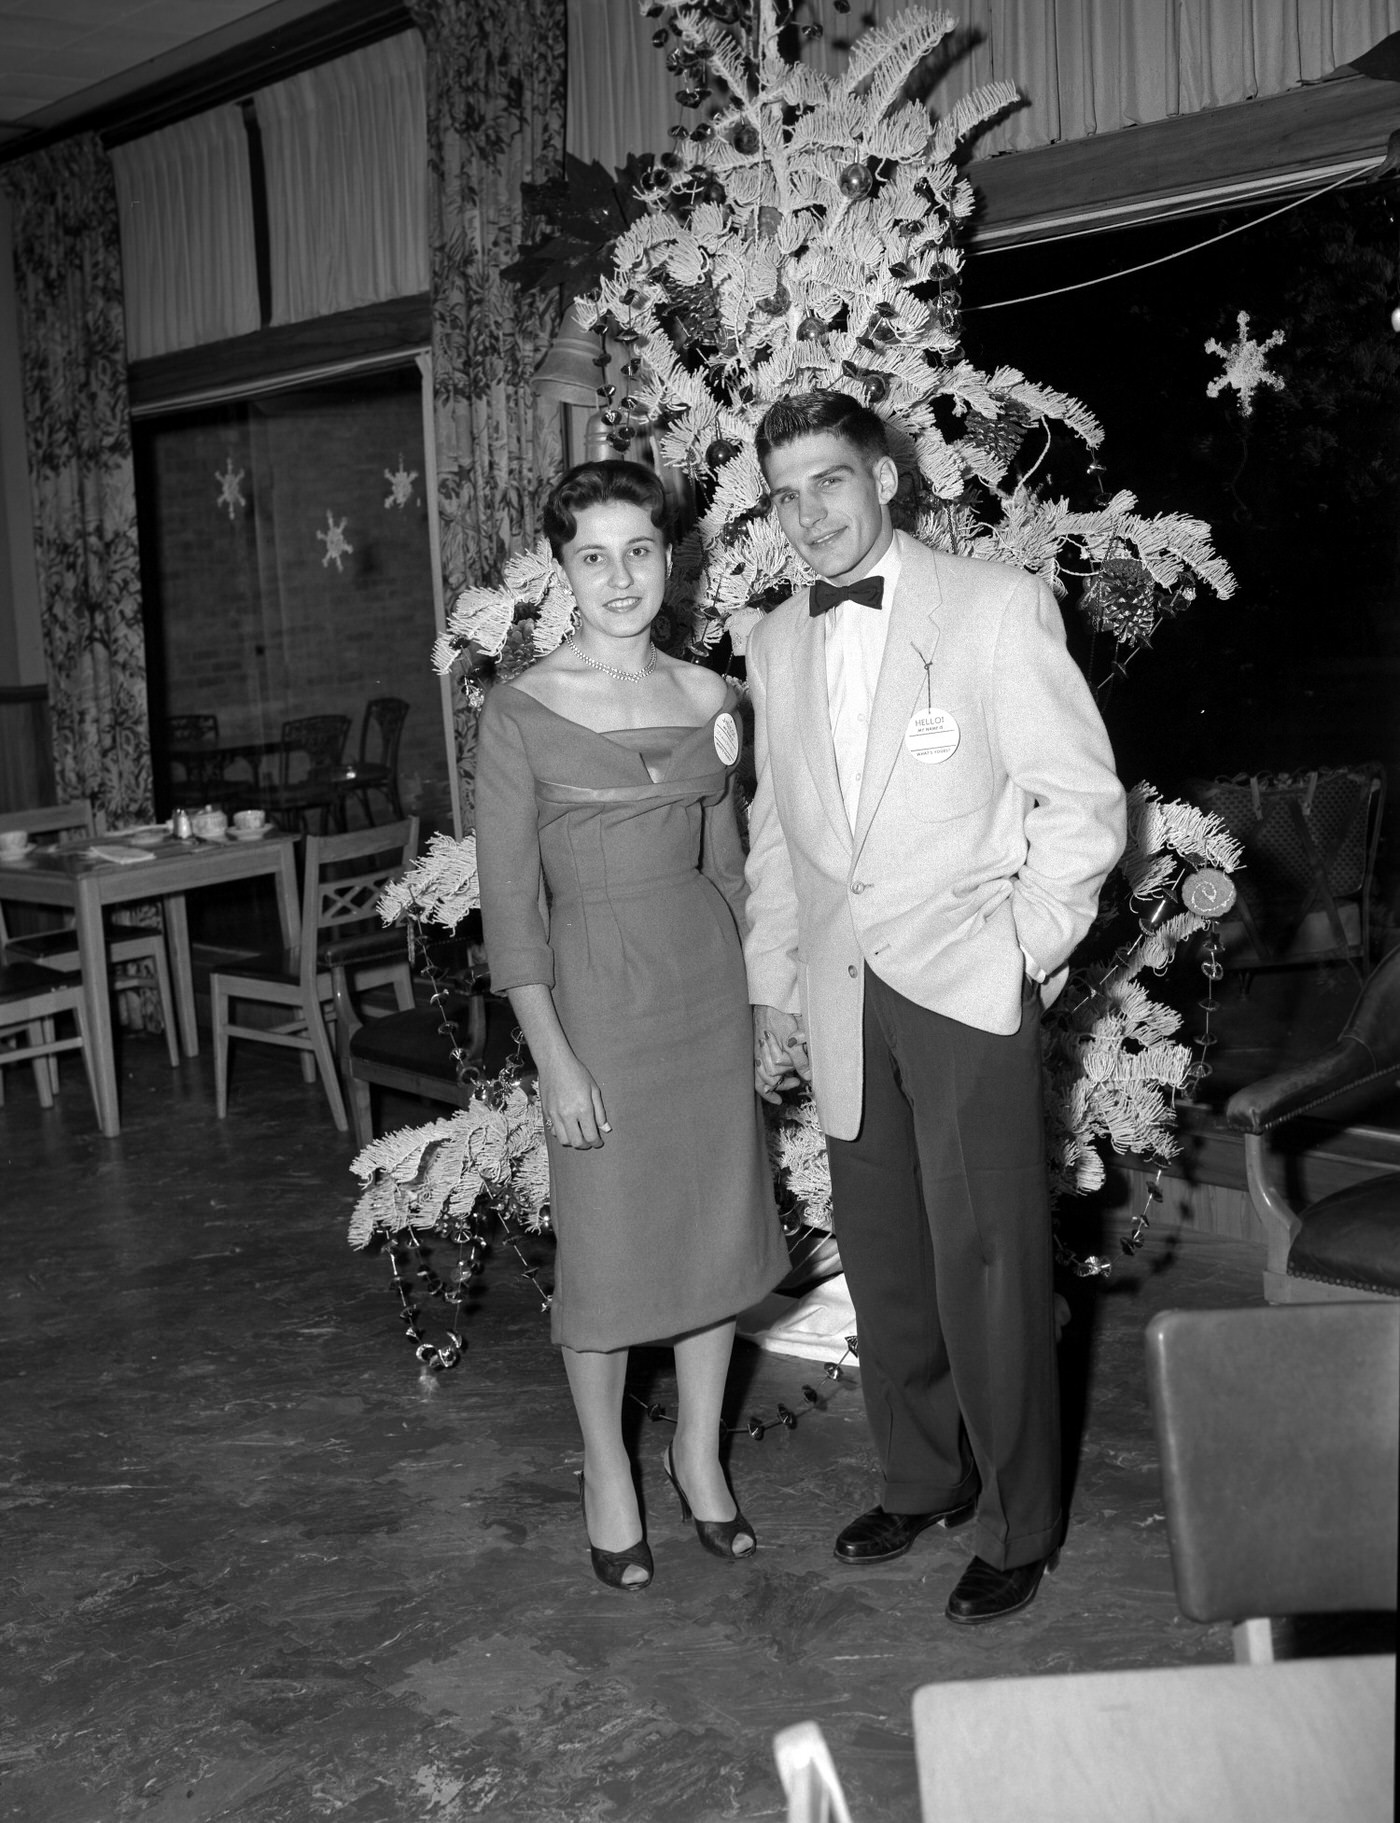 Couple at Southern Union Gas Christmas Party, 1958.